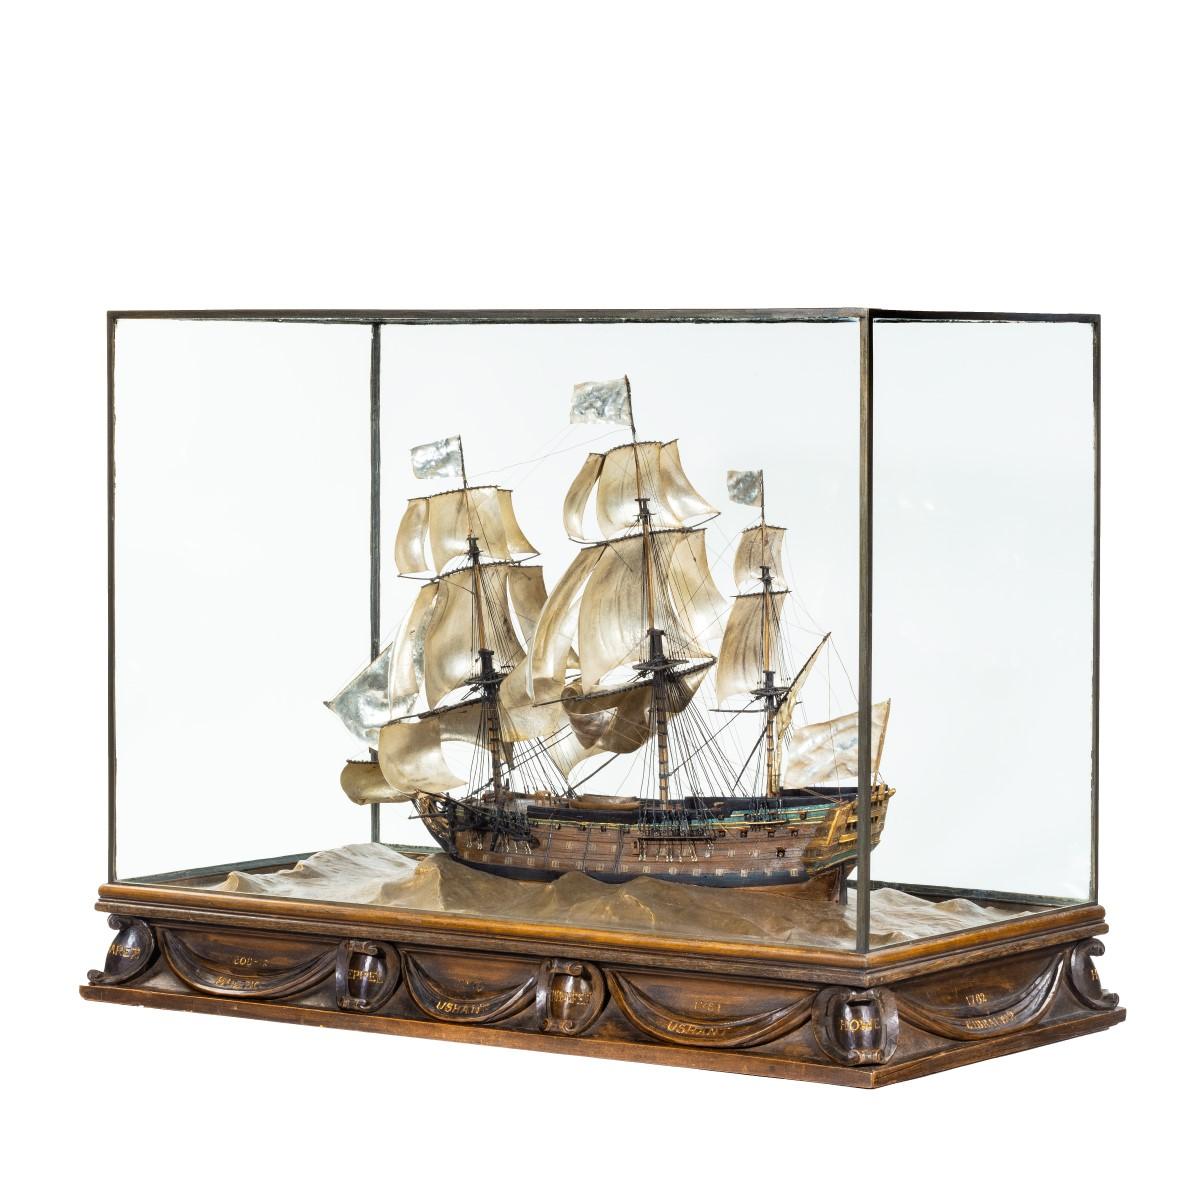 A silver and wood model of HMS Victory by H Wylie, showing ‘Victory’ in her first commission 1780, constructed from ships’ timbers by the artist Harold Wyllie (1880-1973), fully rigged with silver sails over an African oak and ebony hull with